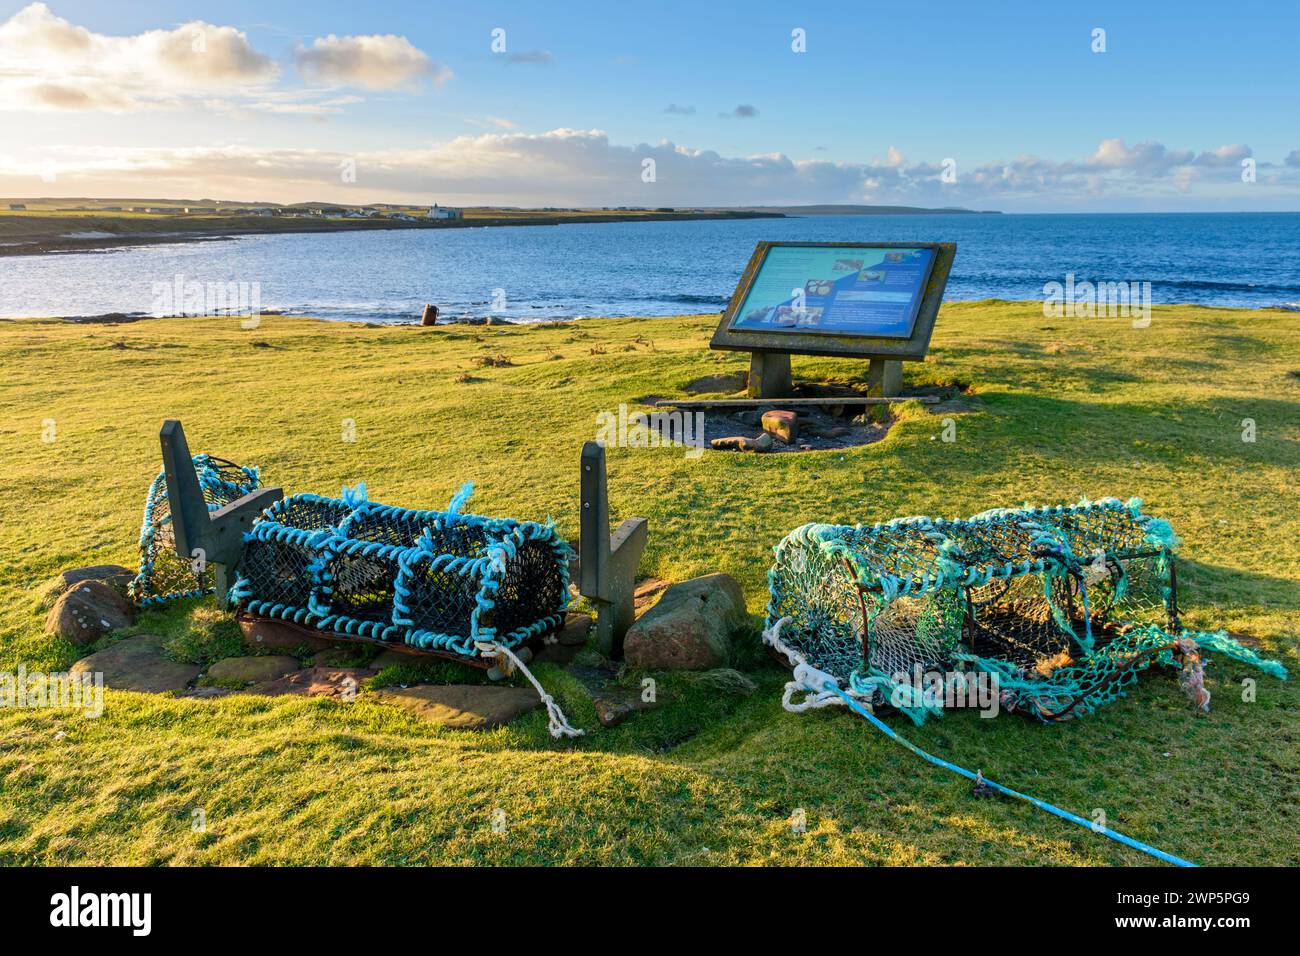 Lobster or crab creels and information sign at the Ness of Duncansby, between John o'Groats and Duncansby Head, Caithness, Scotland, UK Stock Photo